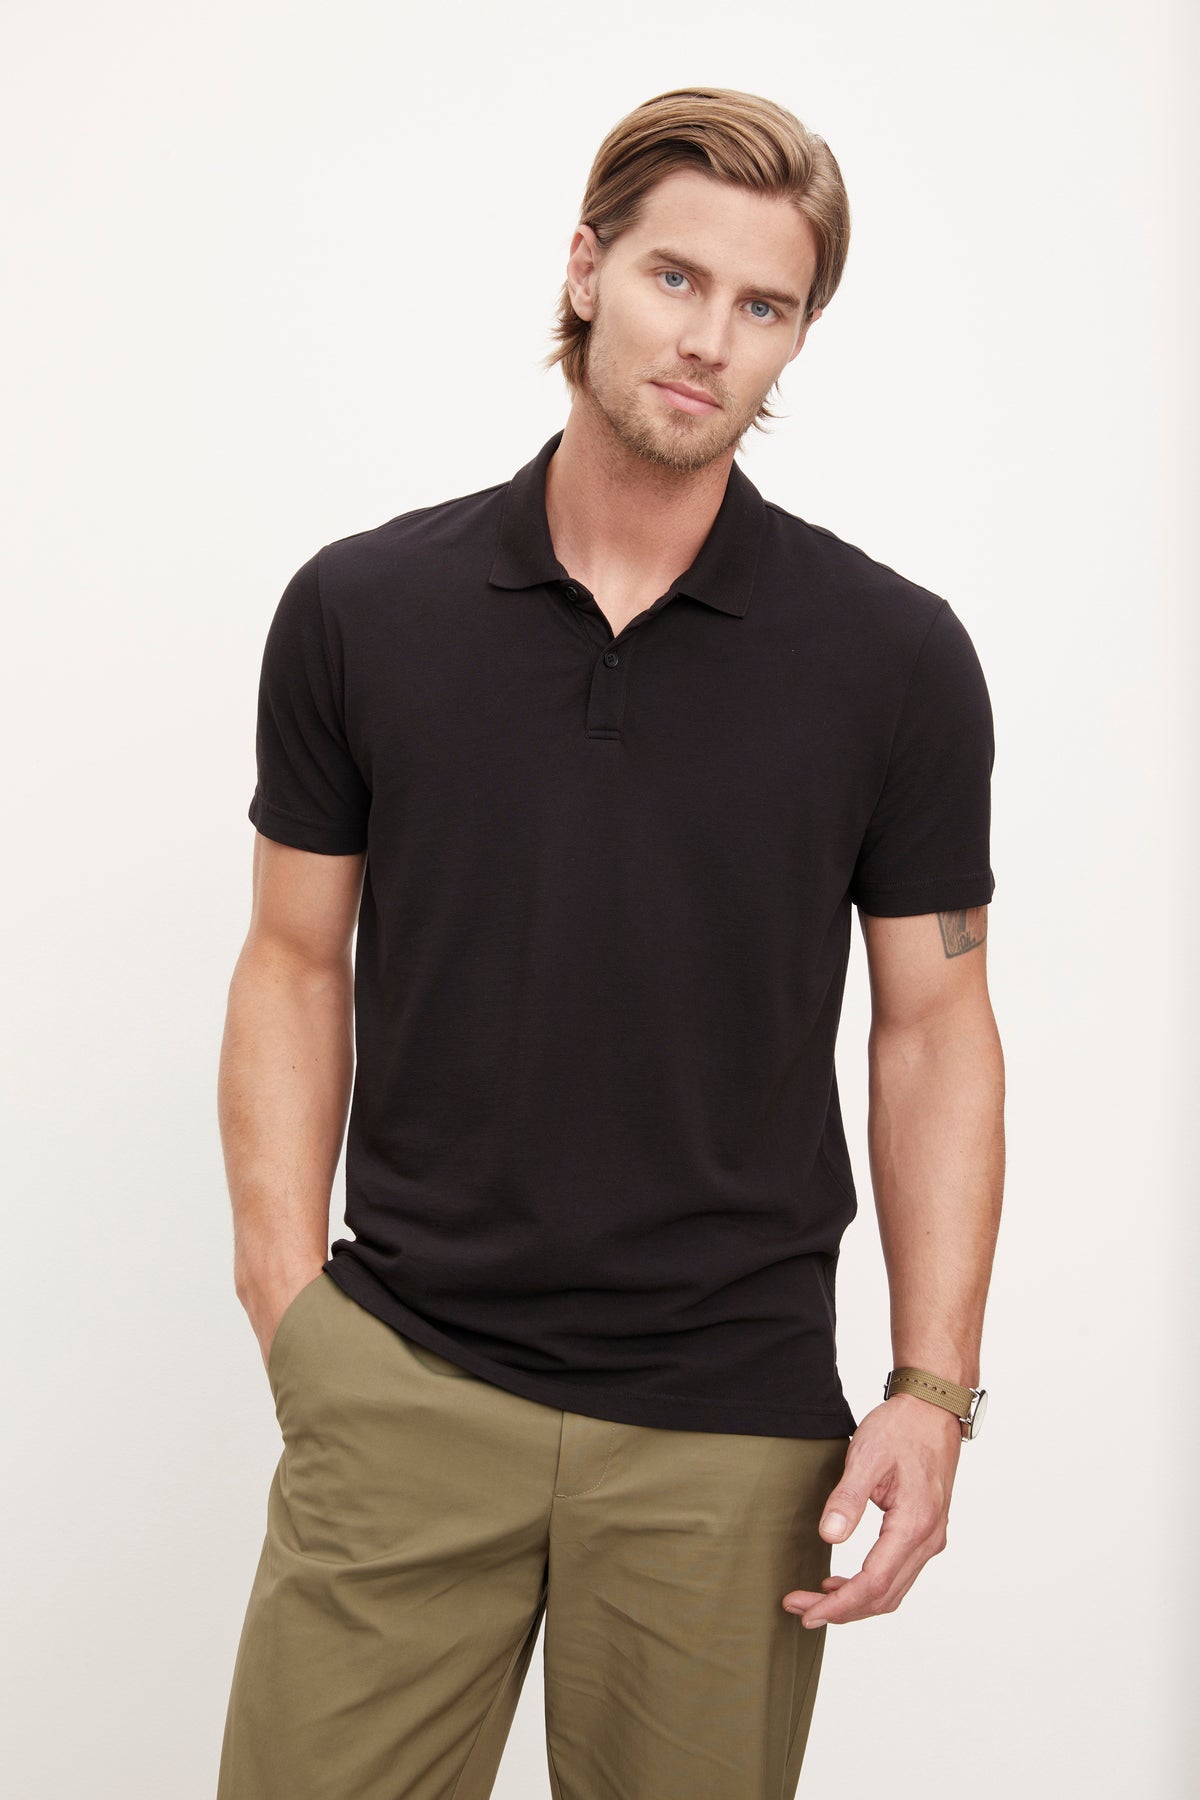 A man wearing a black Velvet by Graham & Spencer Willis Pique Polo shirt and khaki pants.-36009040412865